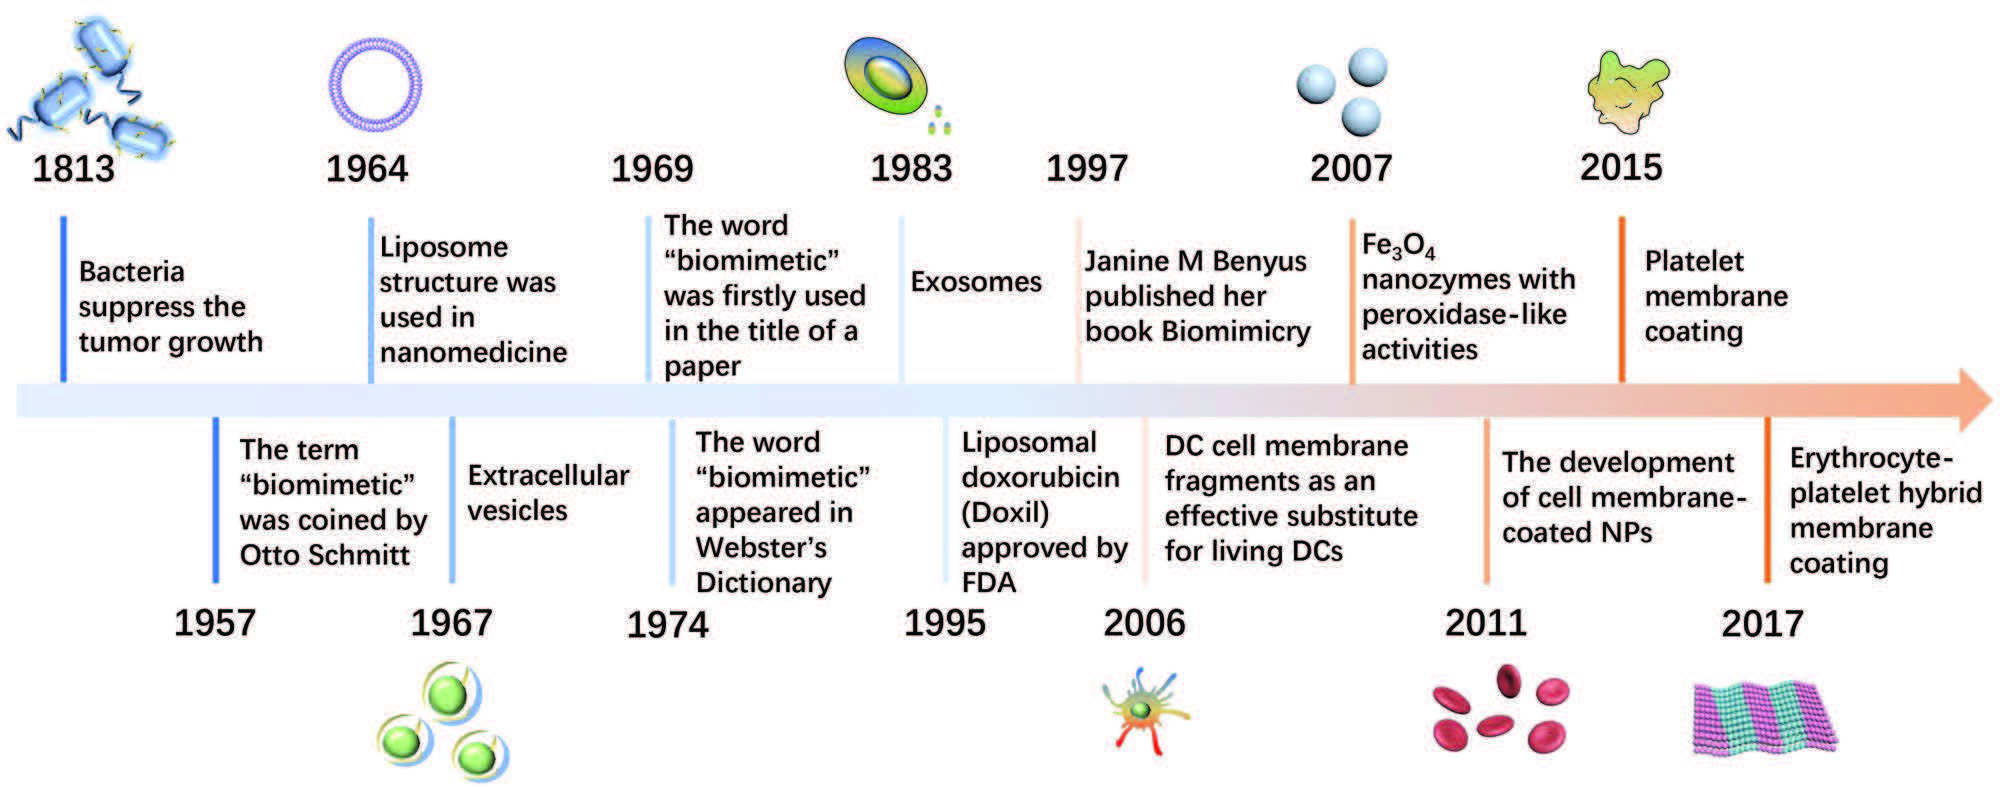 A brief timeline for the development of biomimetic technology